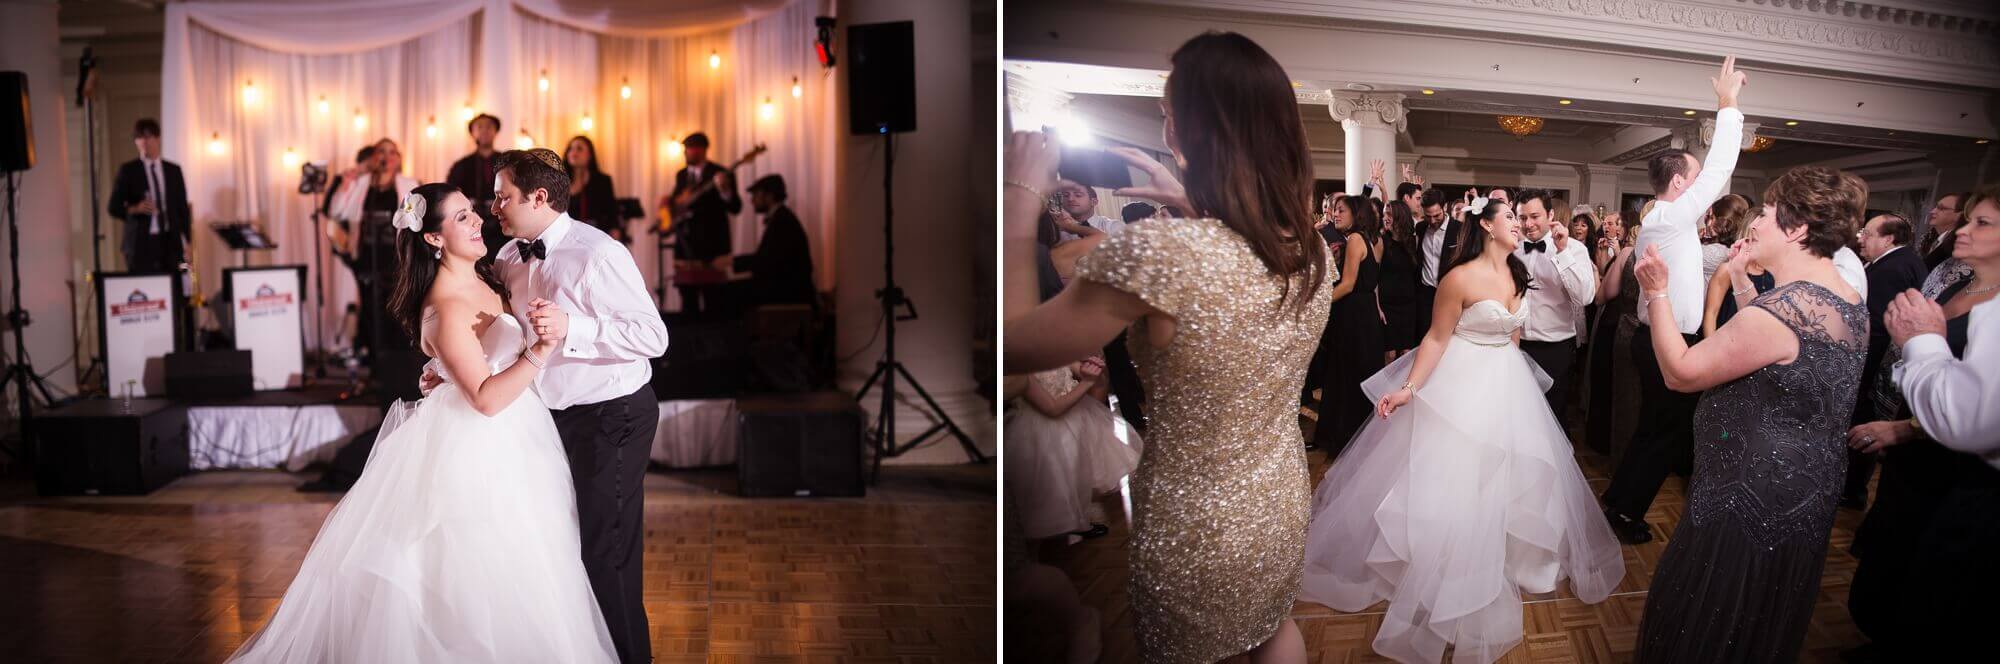 the bride and groom on the dance floor dancing with their surrounding guests at the Omni King Edward Hotel in Toronto